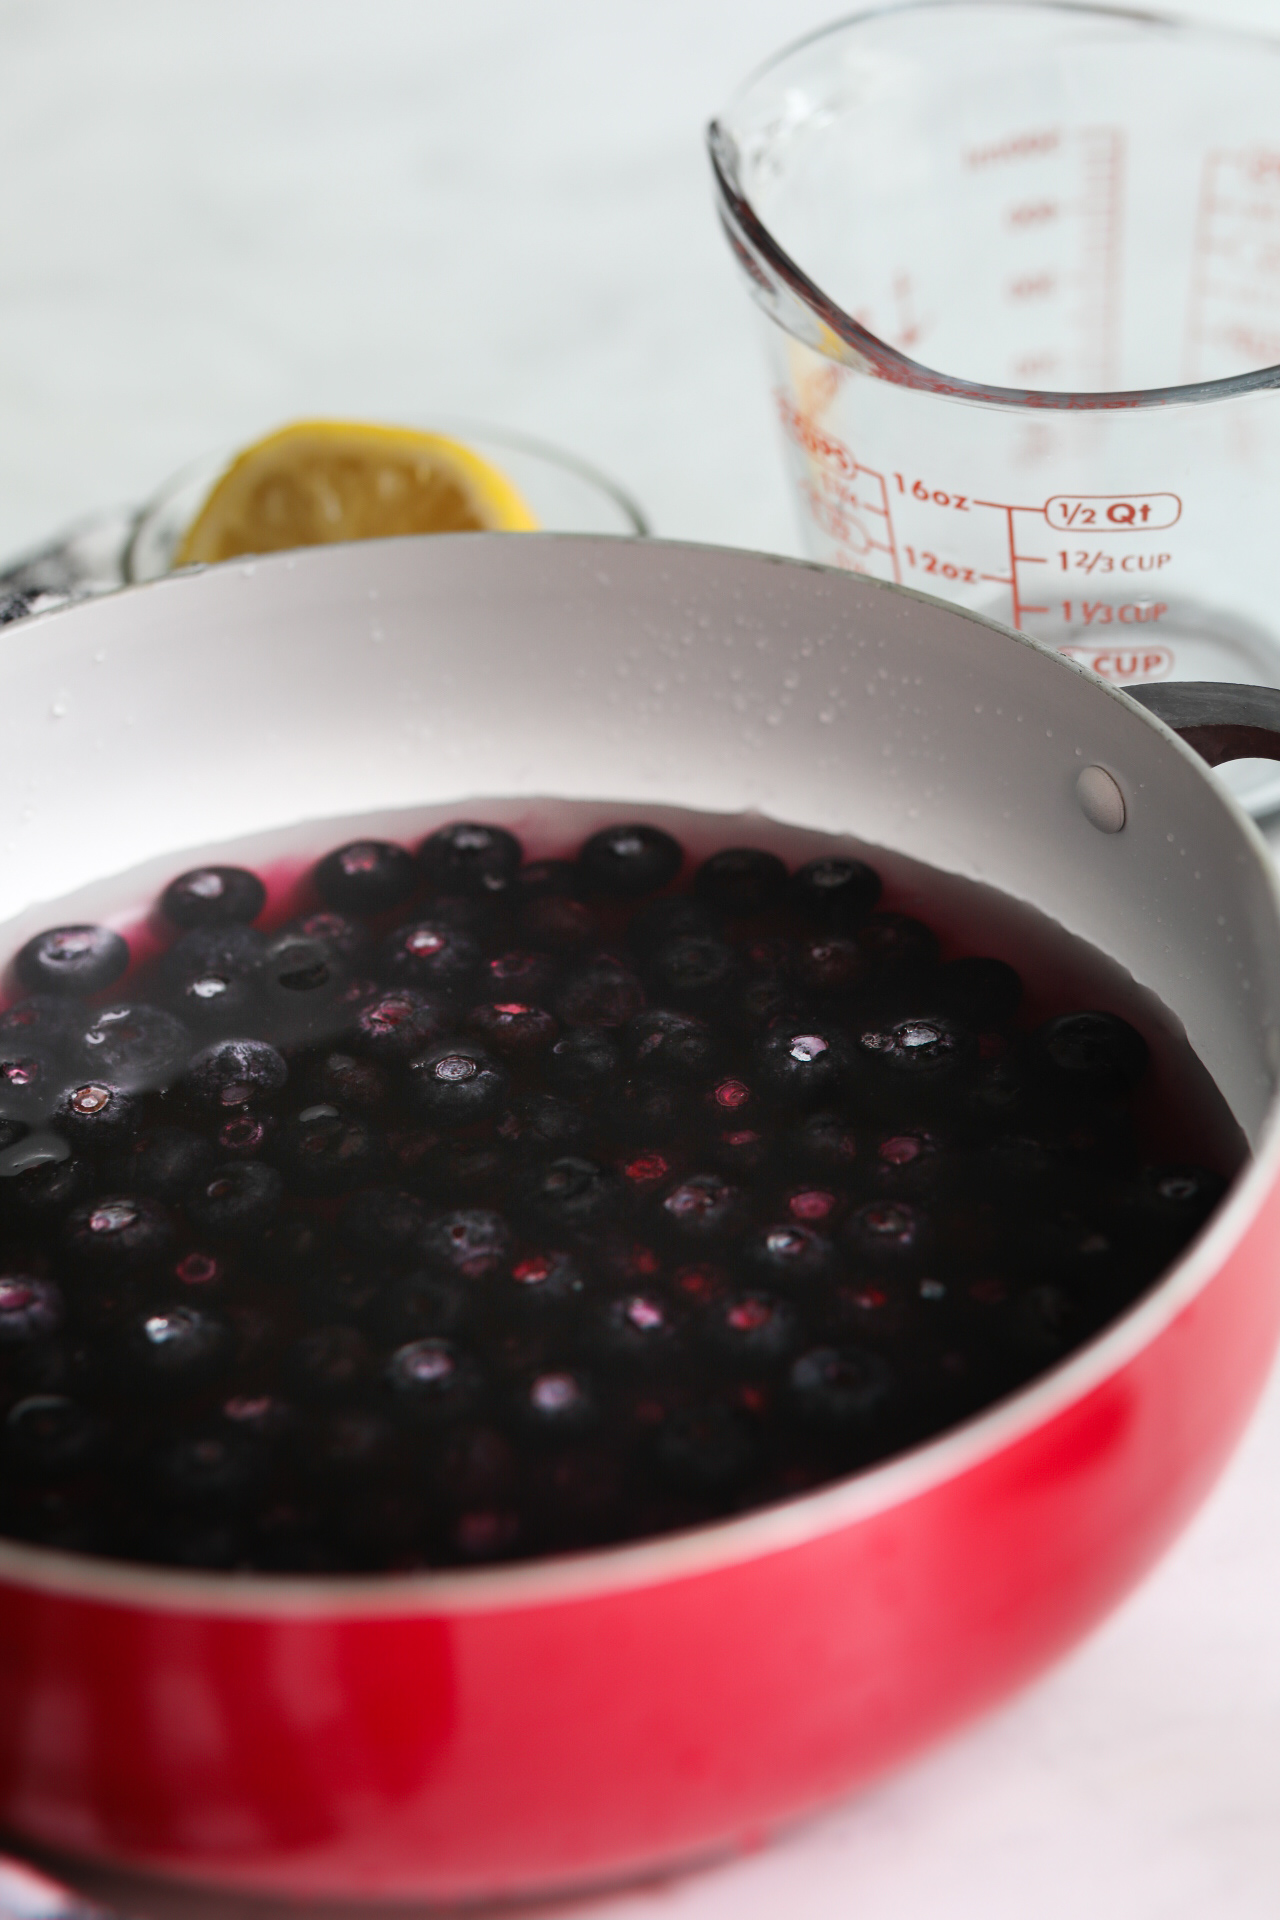 Blueberry syrup ingredients in a large red pot.